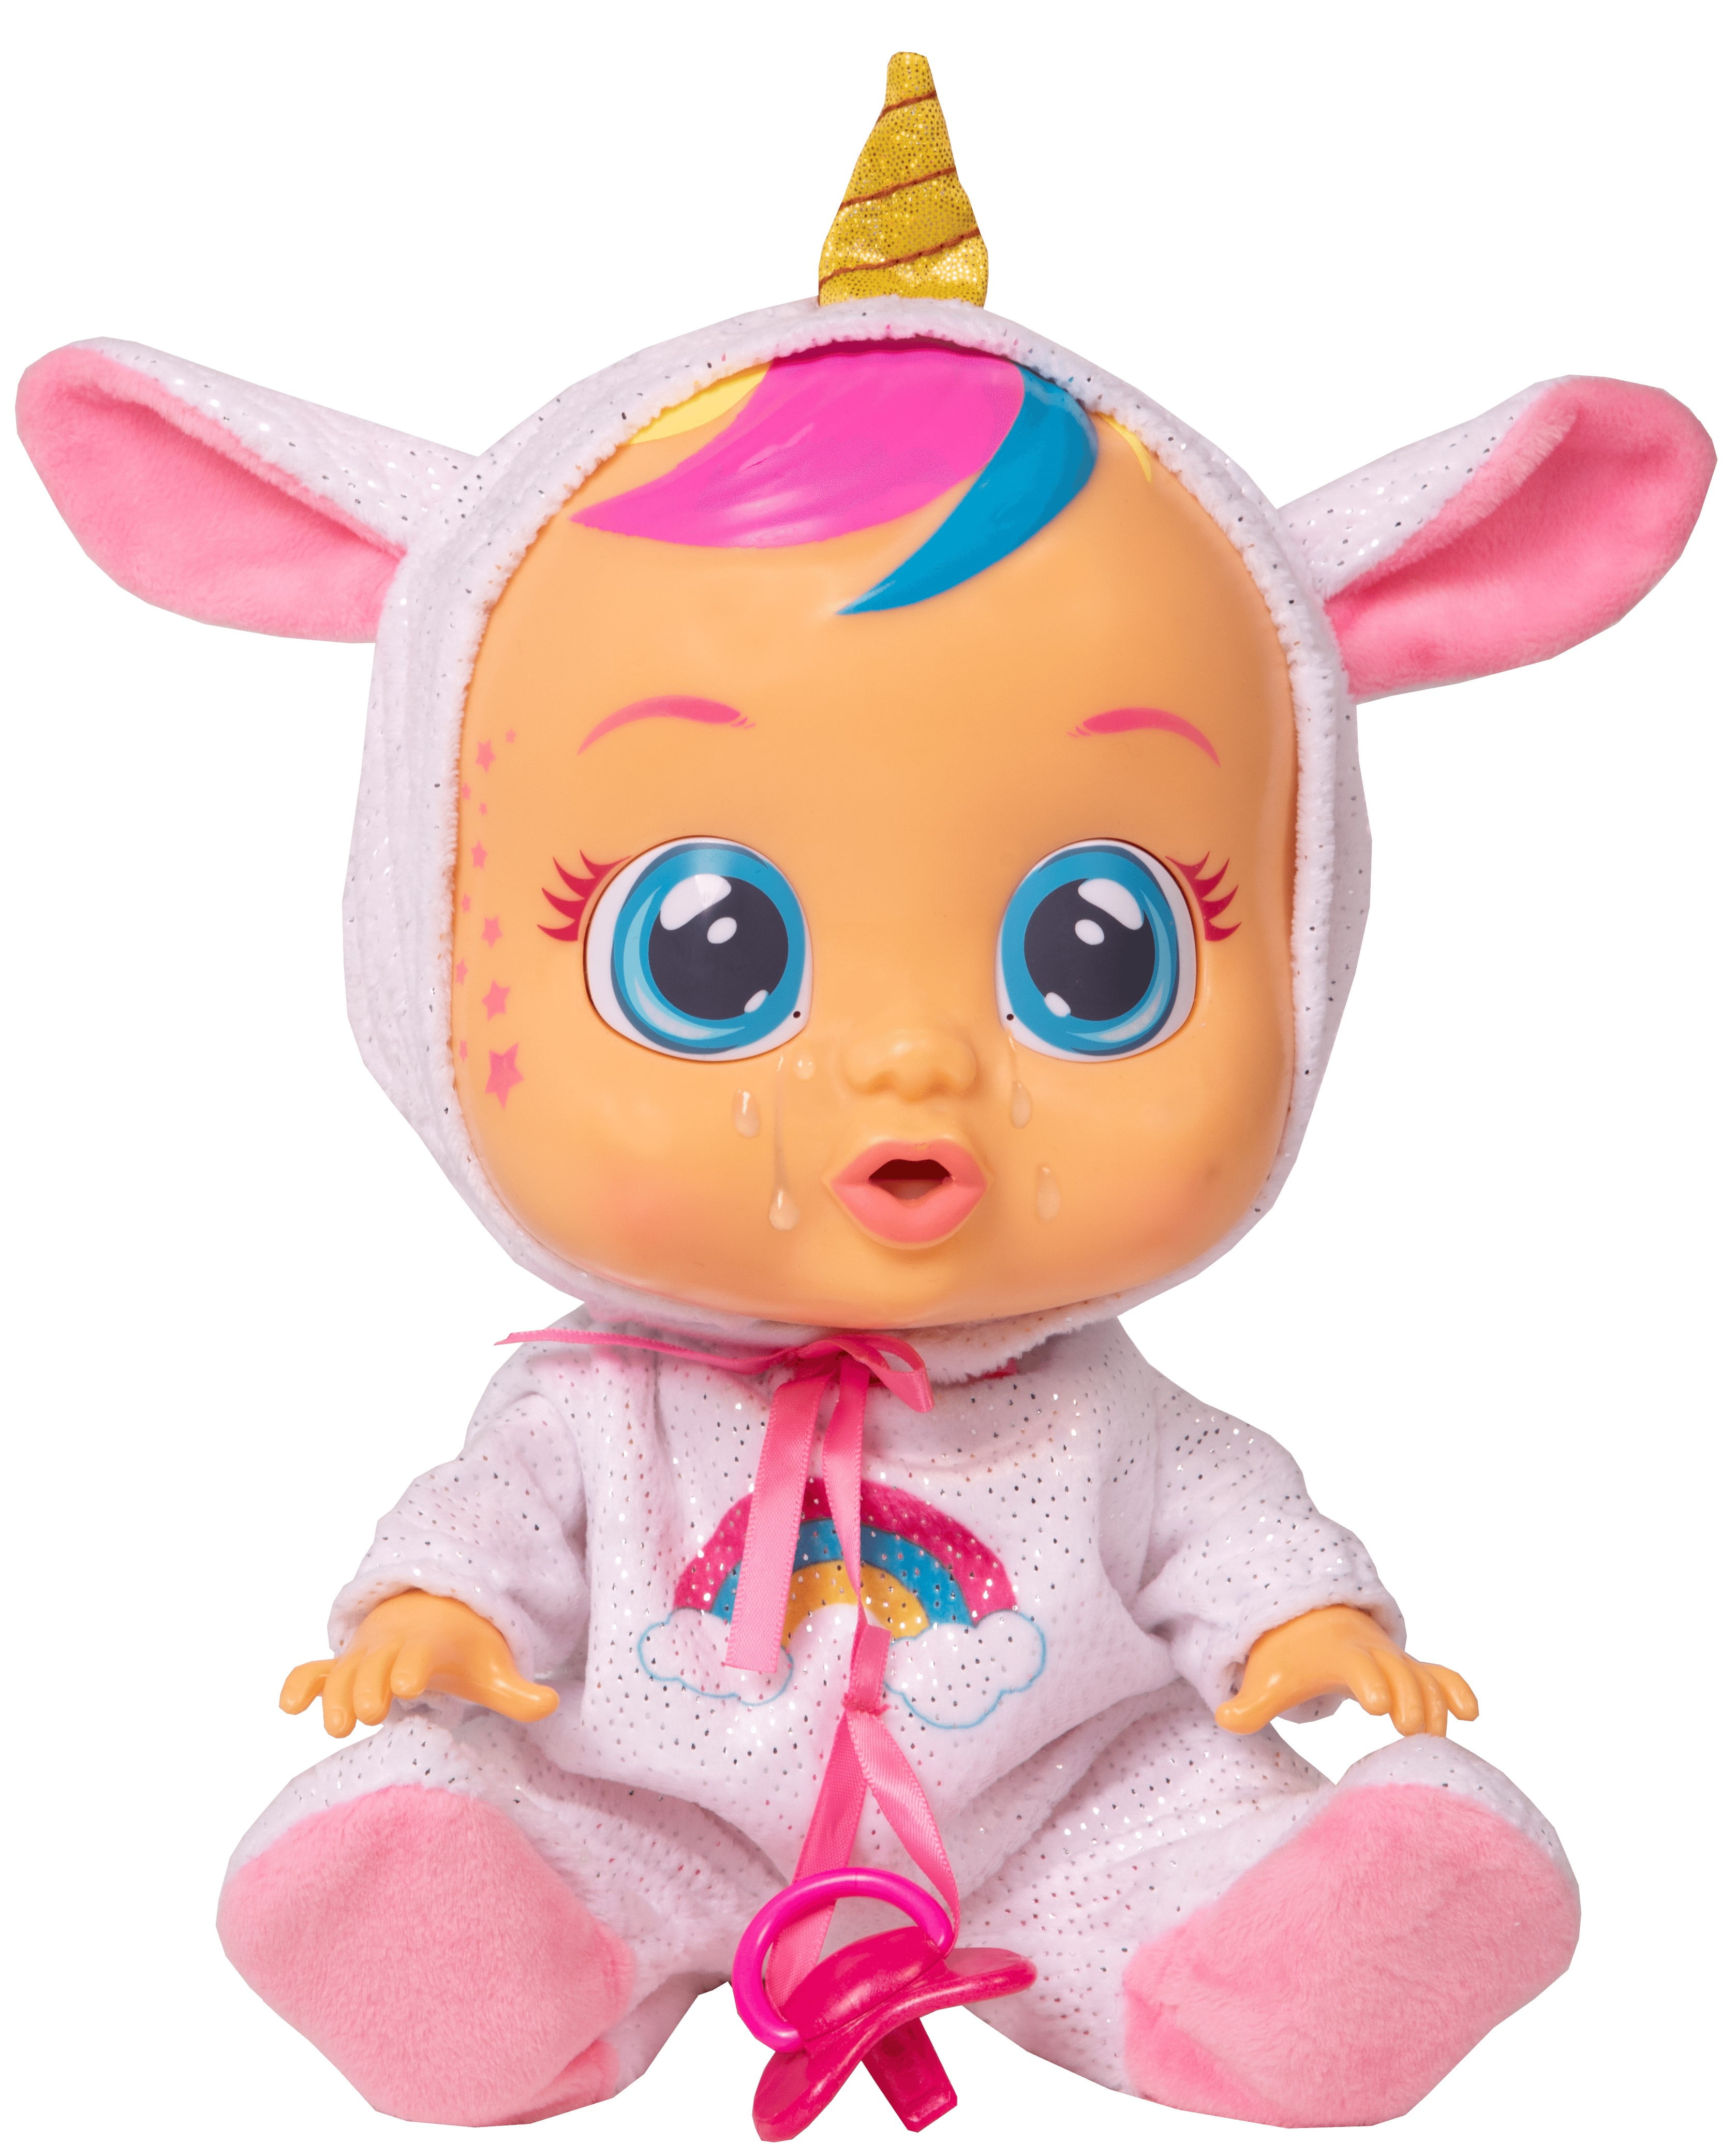 Cry Babies Dreamy Baby Doll (Walmart Exclusive) - Ages 18+ months